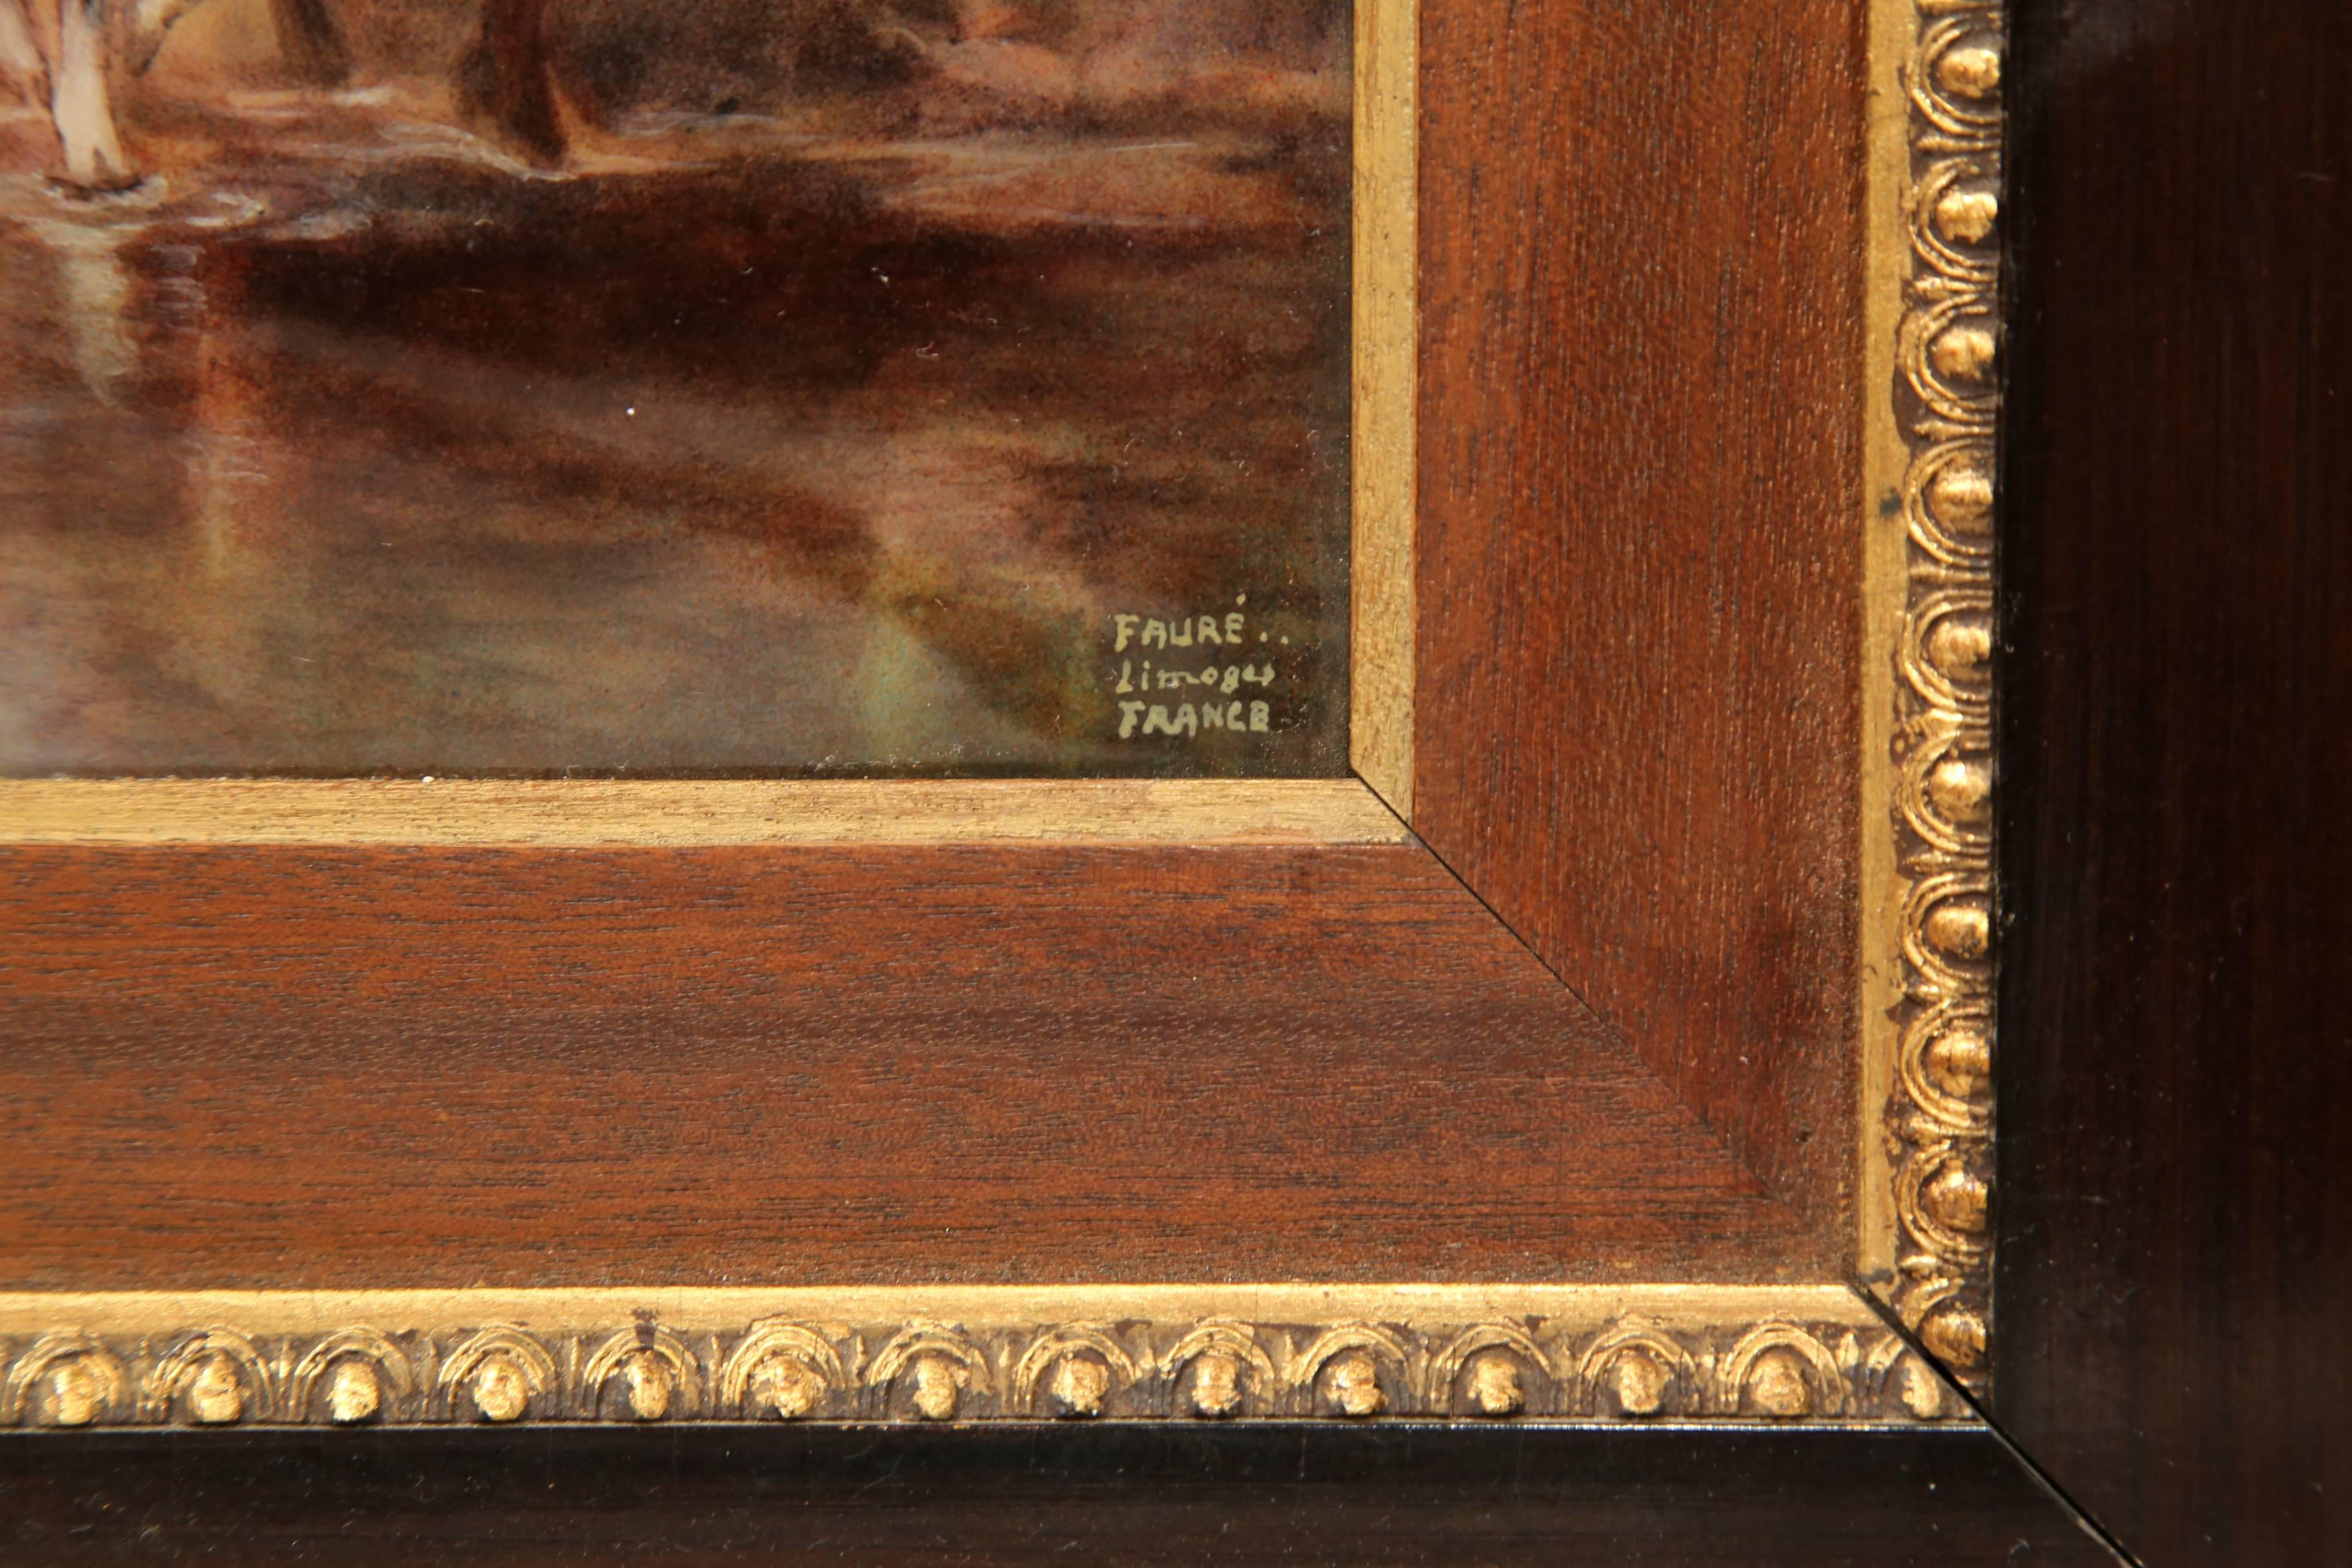 Early 20th Century, French Framed Enamel Cow Painting Signed Faure Limoges 2